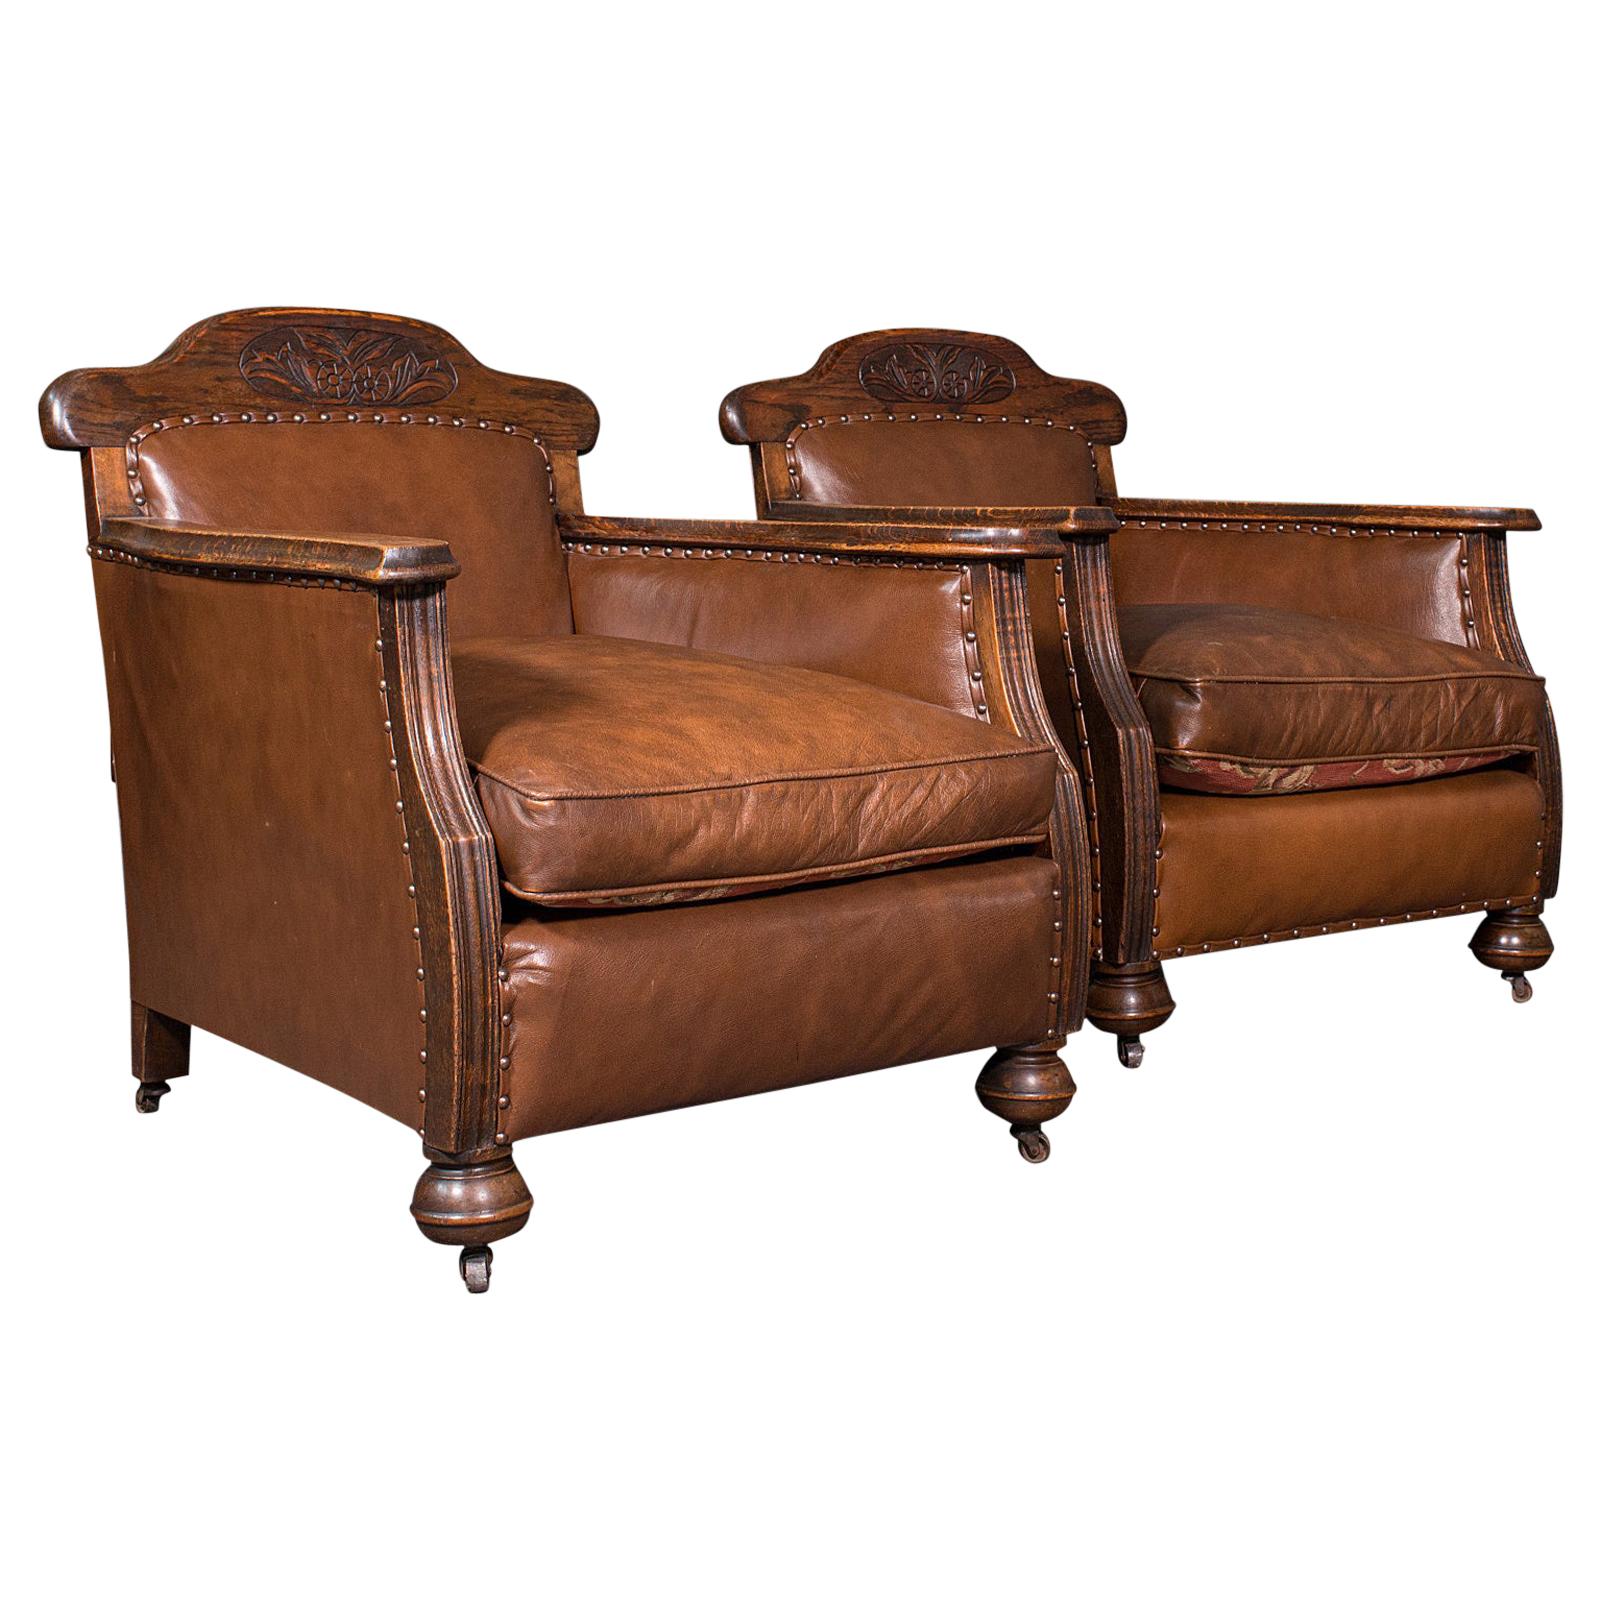 Pair of, Antique Gentleman's Club Chairs, Leather, Fireside, Seat, Edwardian